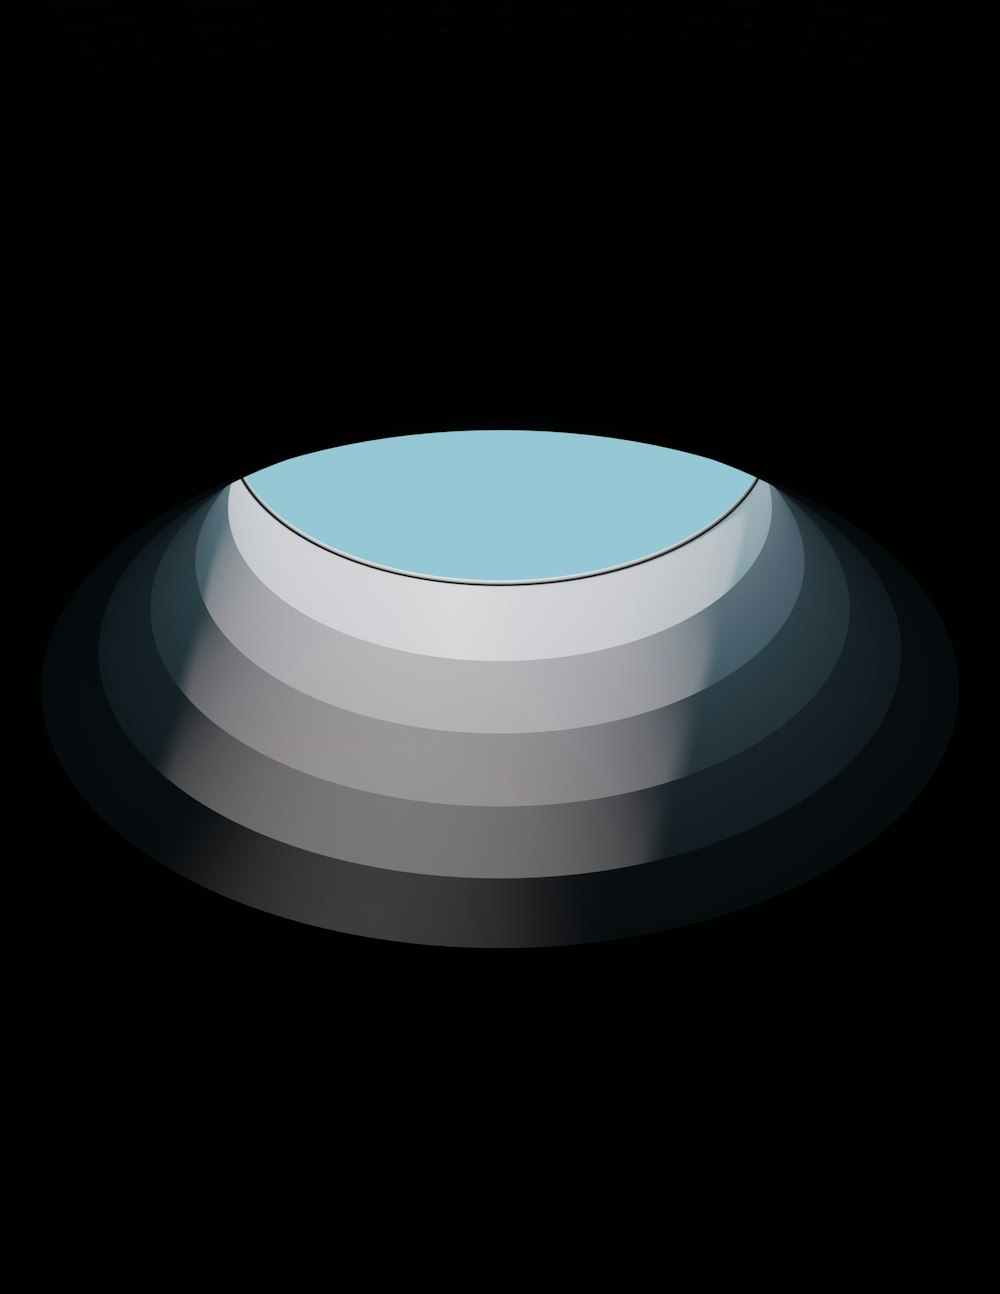 a round object with a blue center on a black background